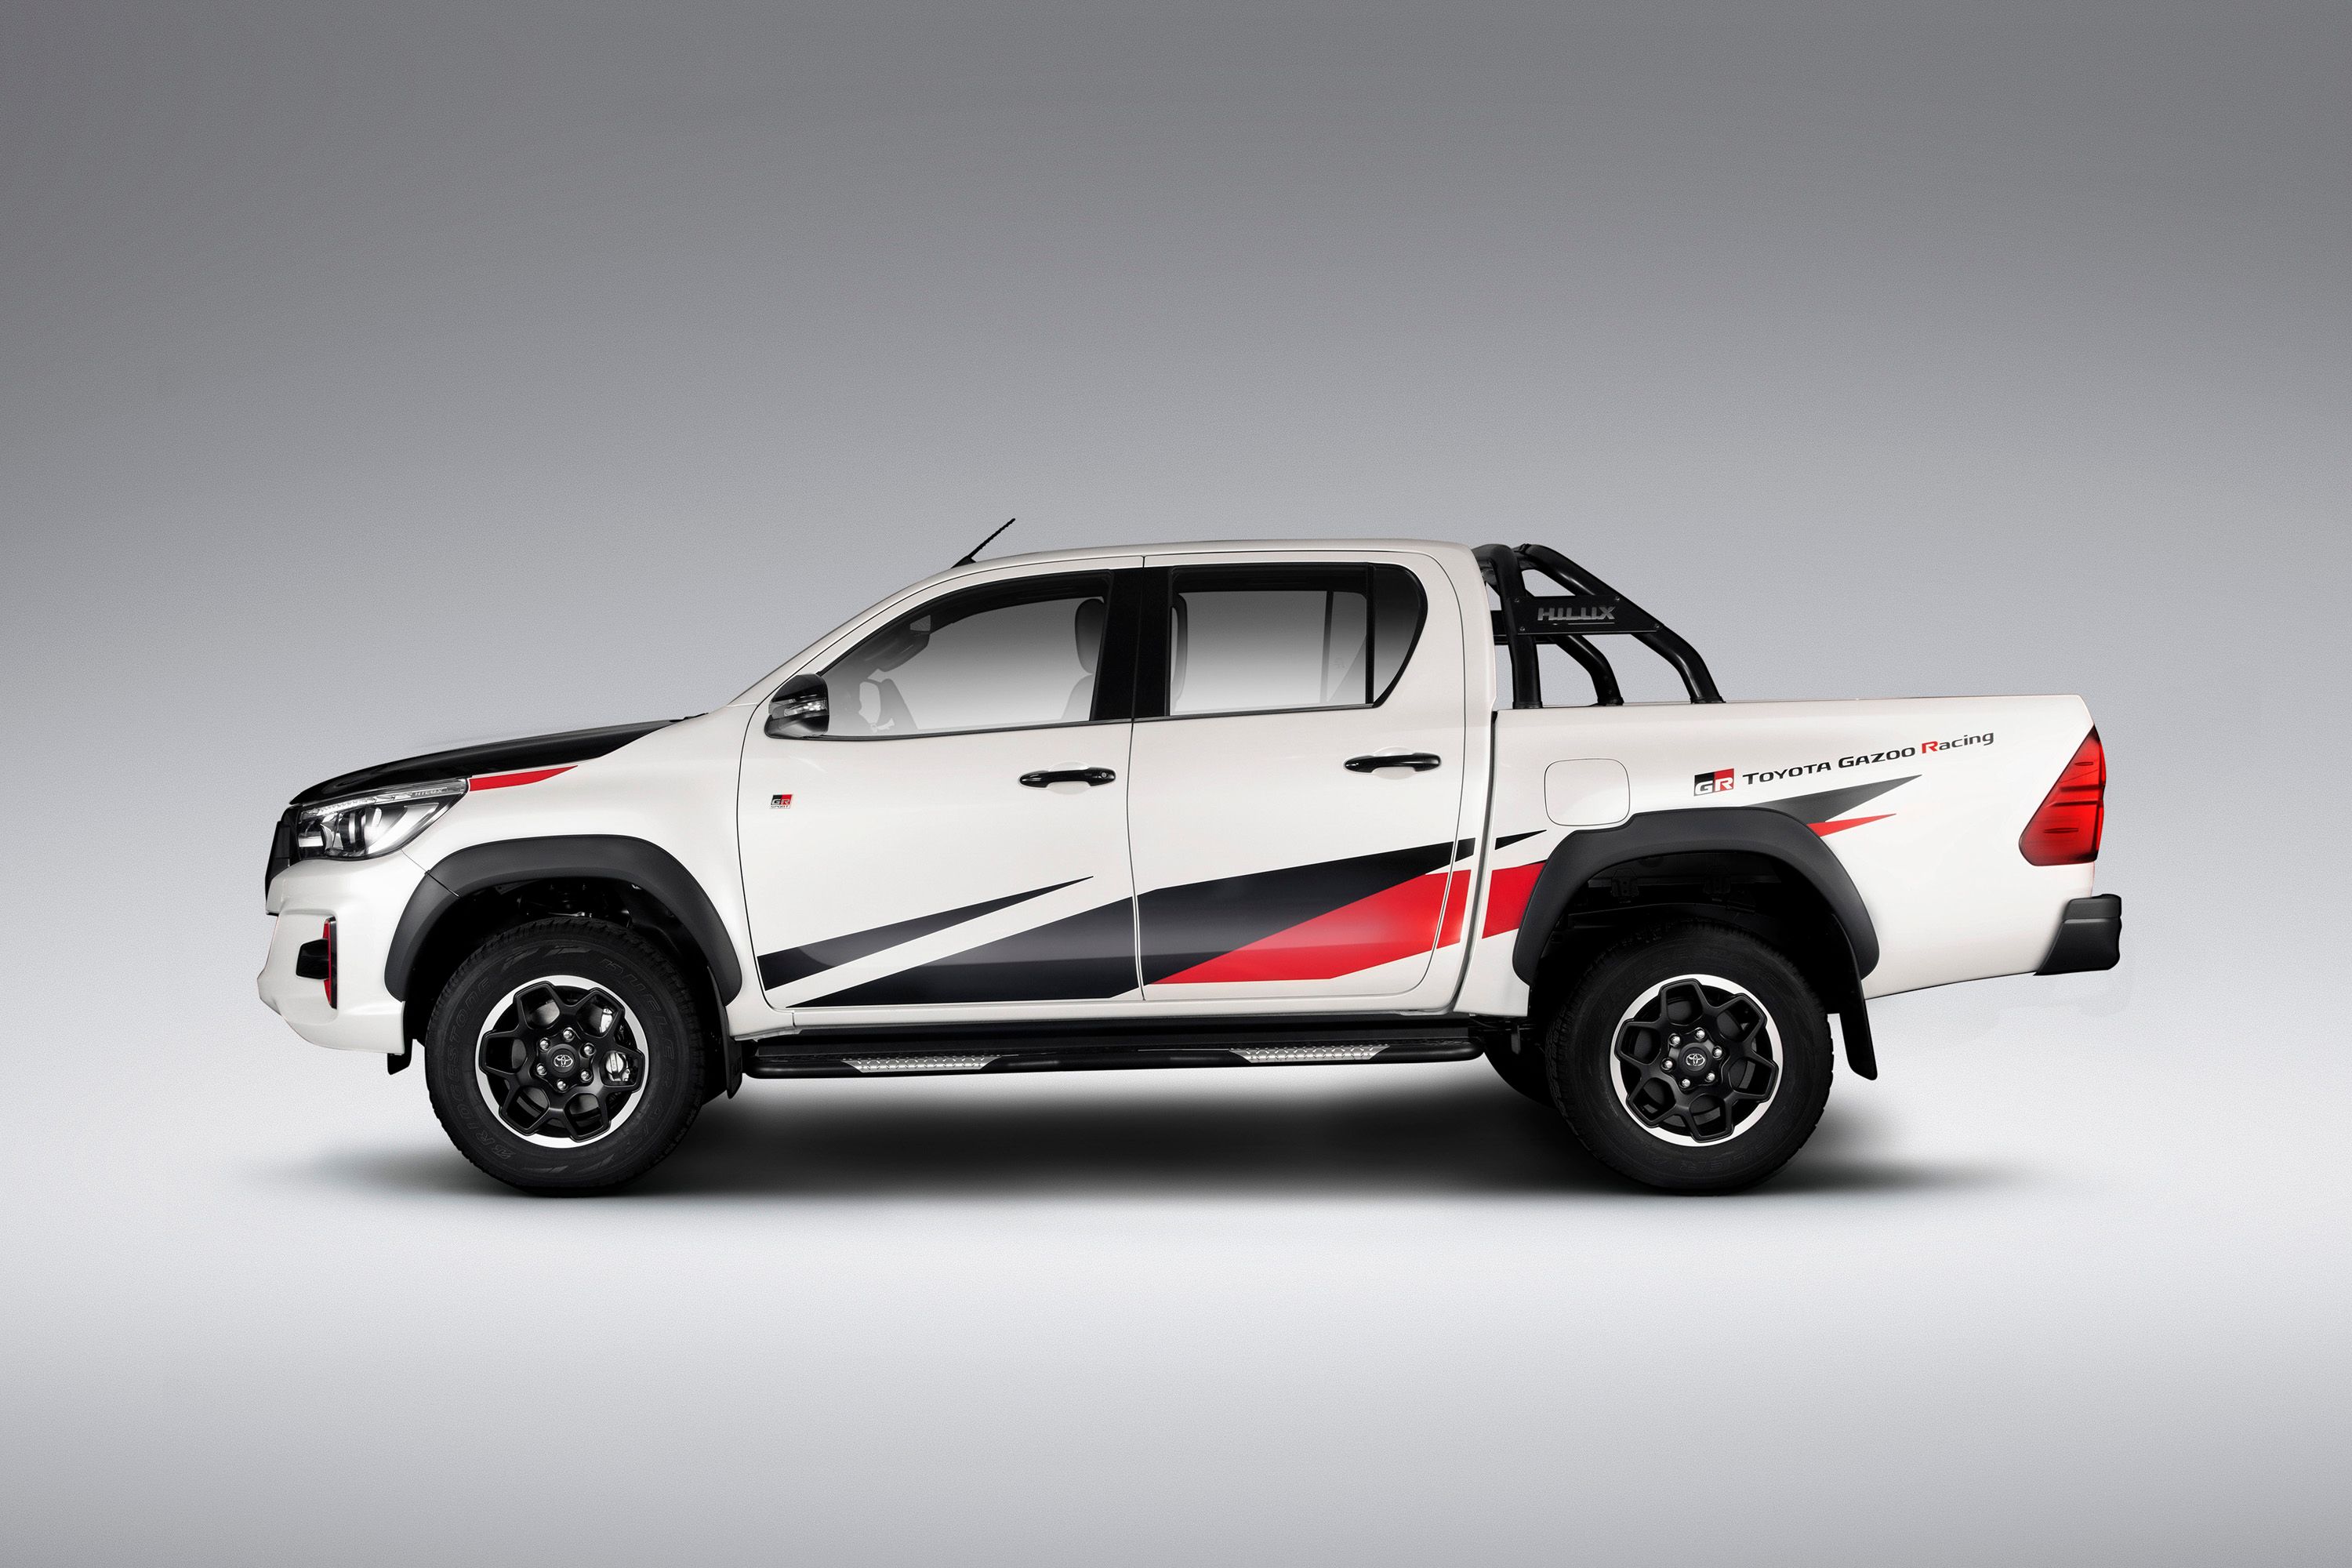 2020 This Is How the Toyota GR Hilux Is Going to Take on the Ford Ranger Raptor